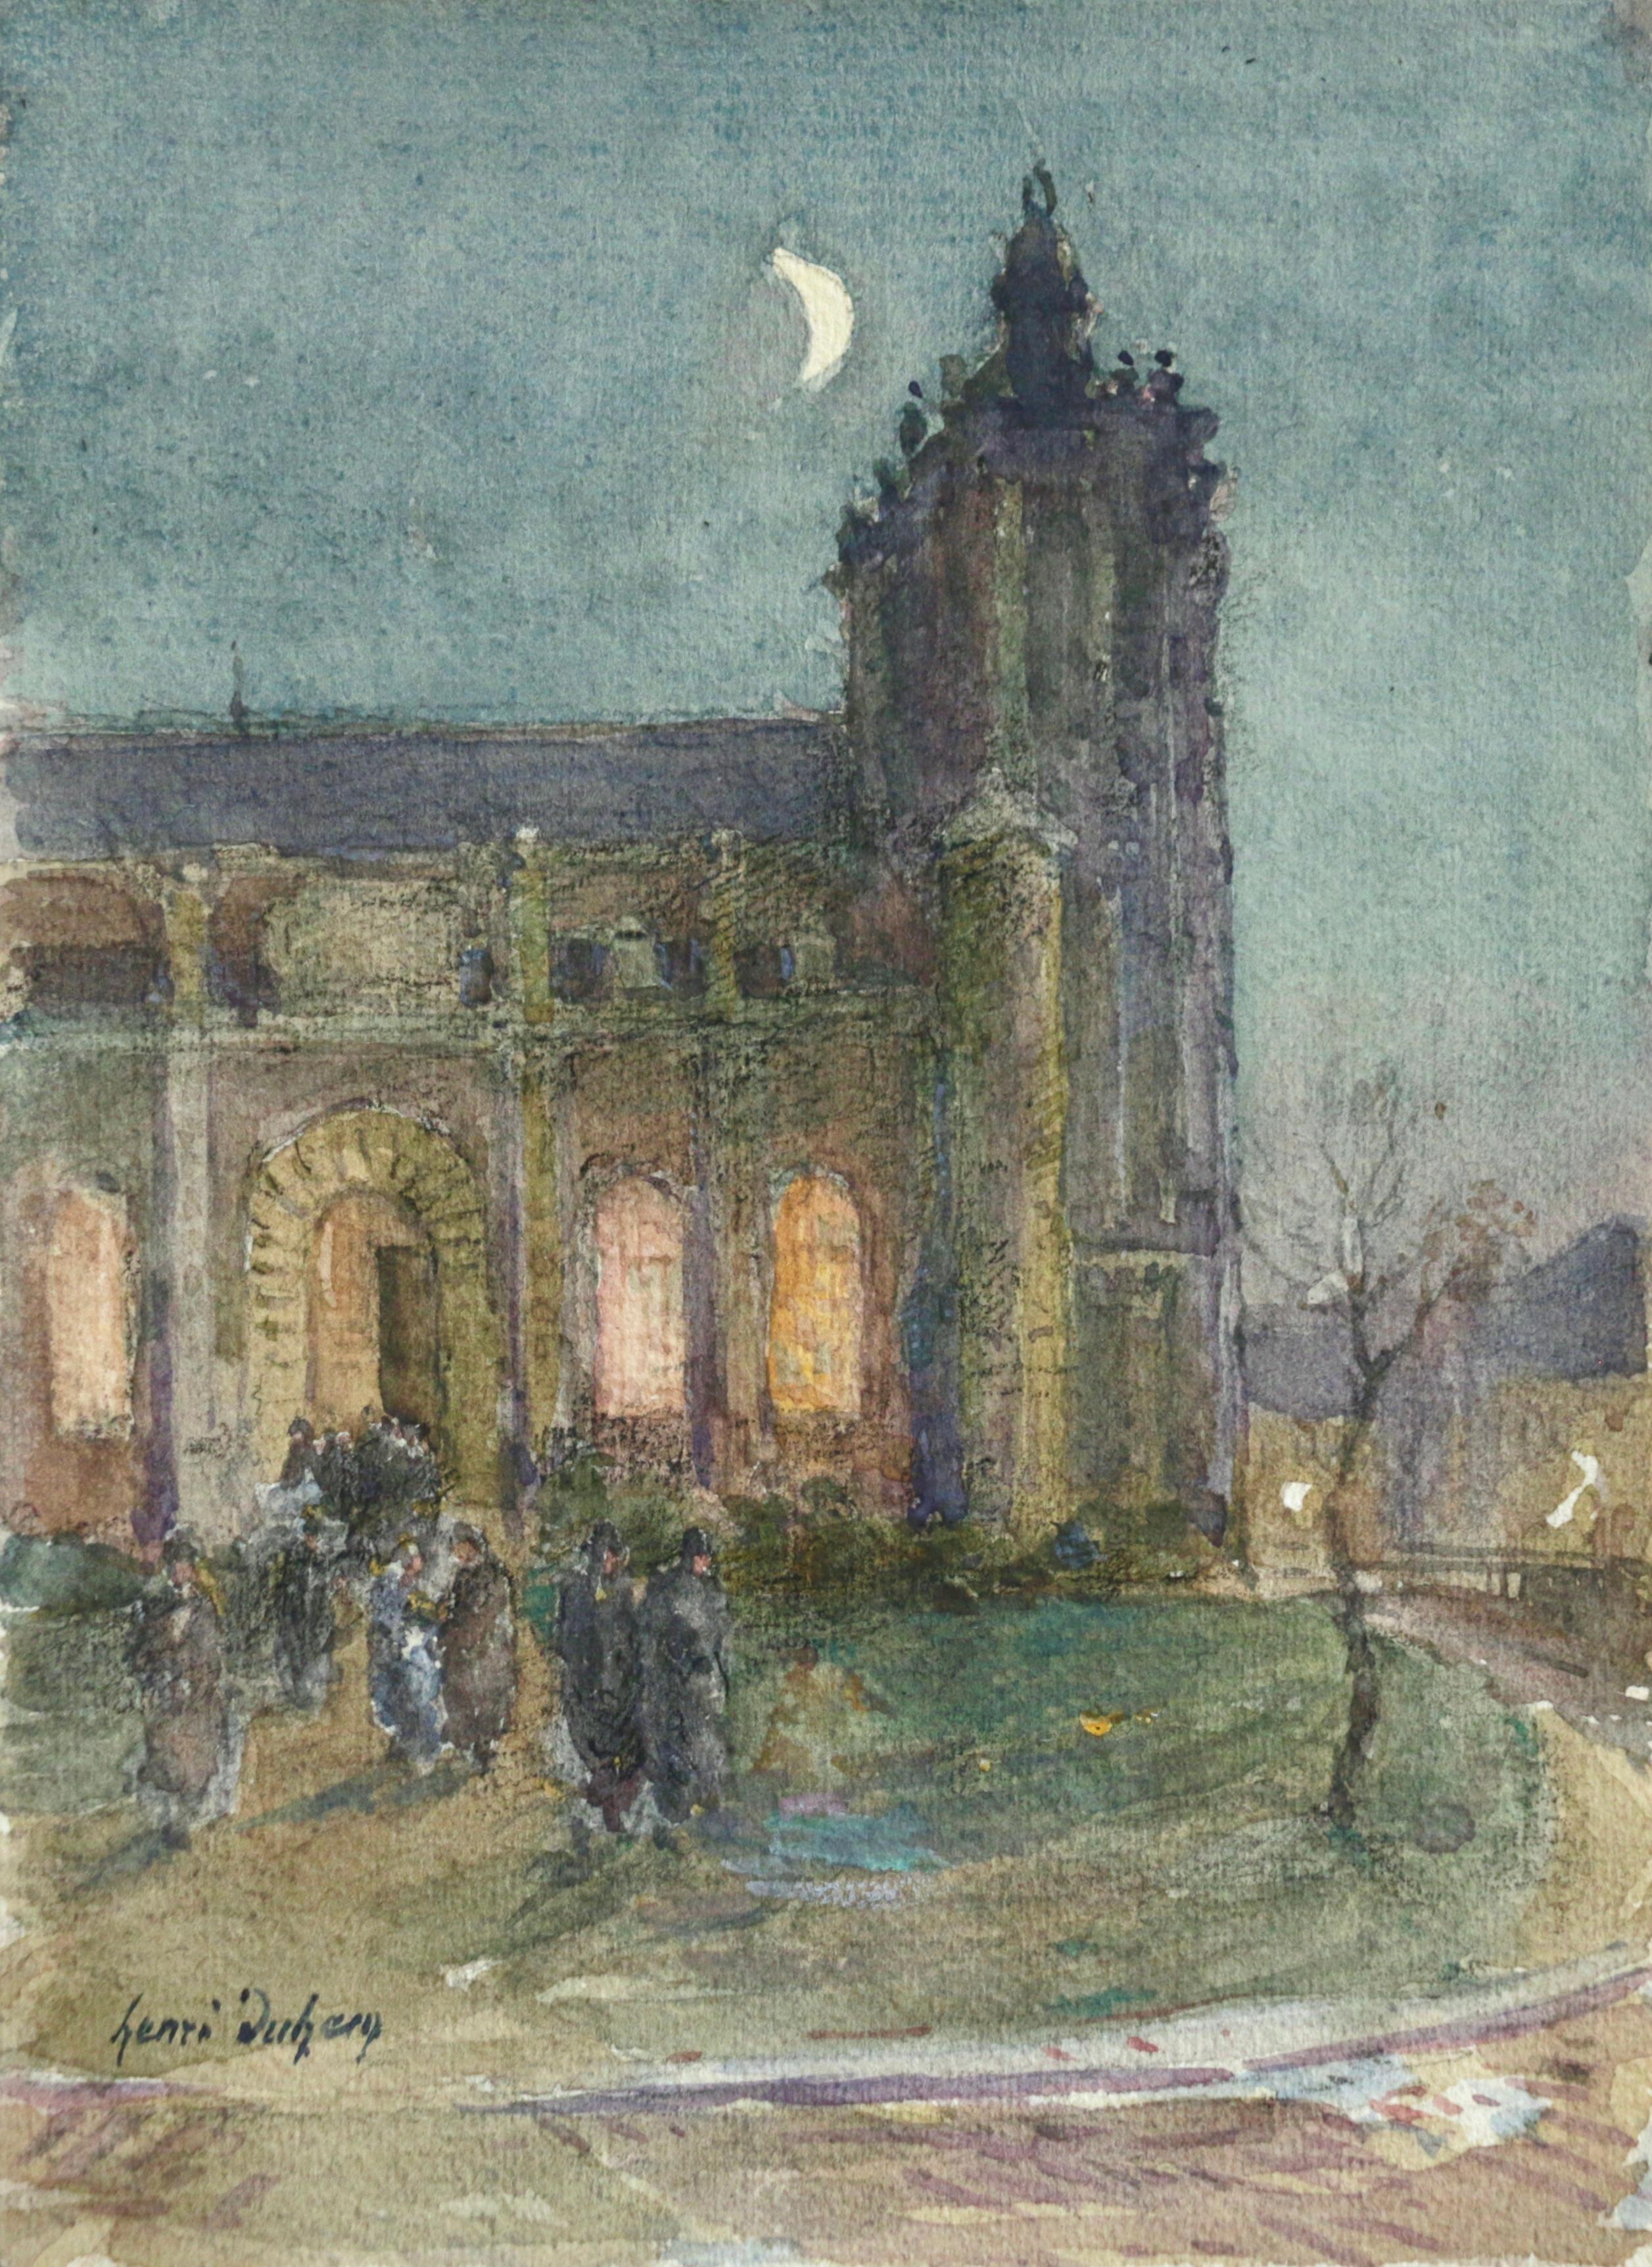 Signed impressionist watercolour on paper circa 1910 by French painter Henri Duhem. The piece depicts churchgoers leaving mass walking into the cold night. The crescent moon shines brightly above the church in the inky blue sky. 

Signature:
Signed